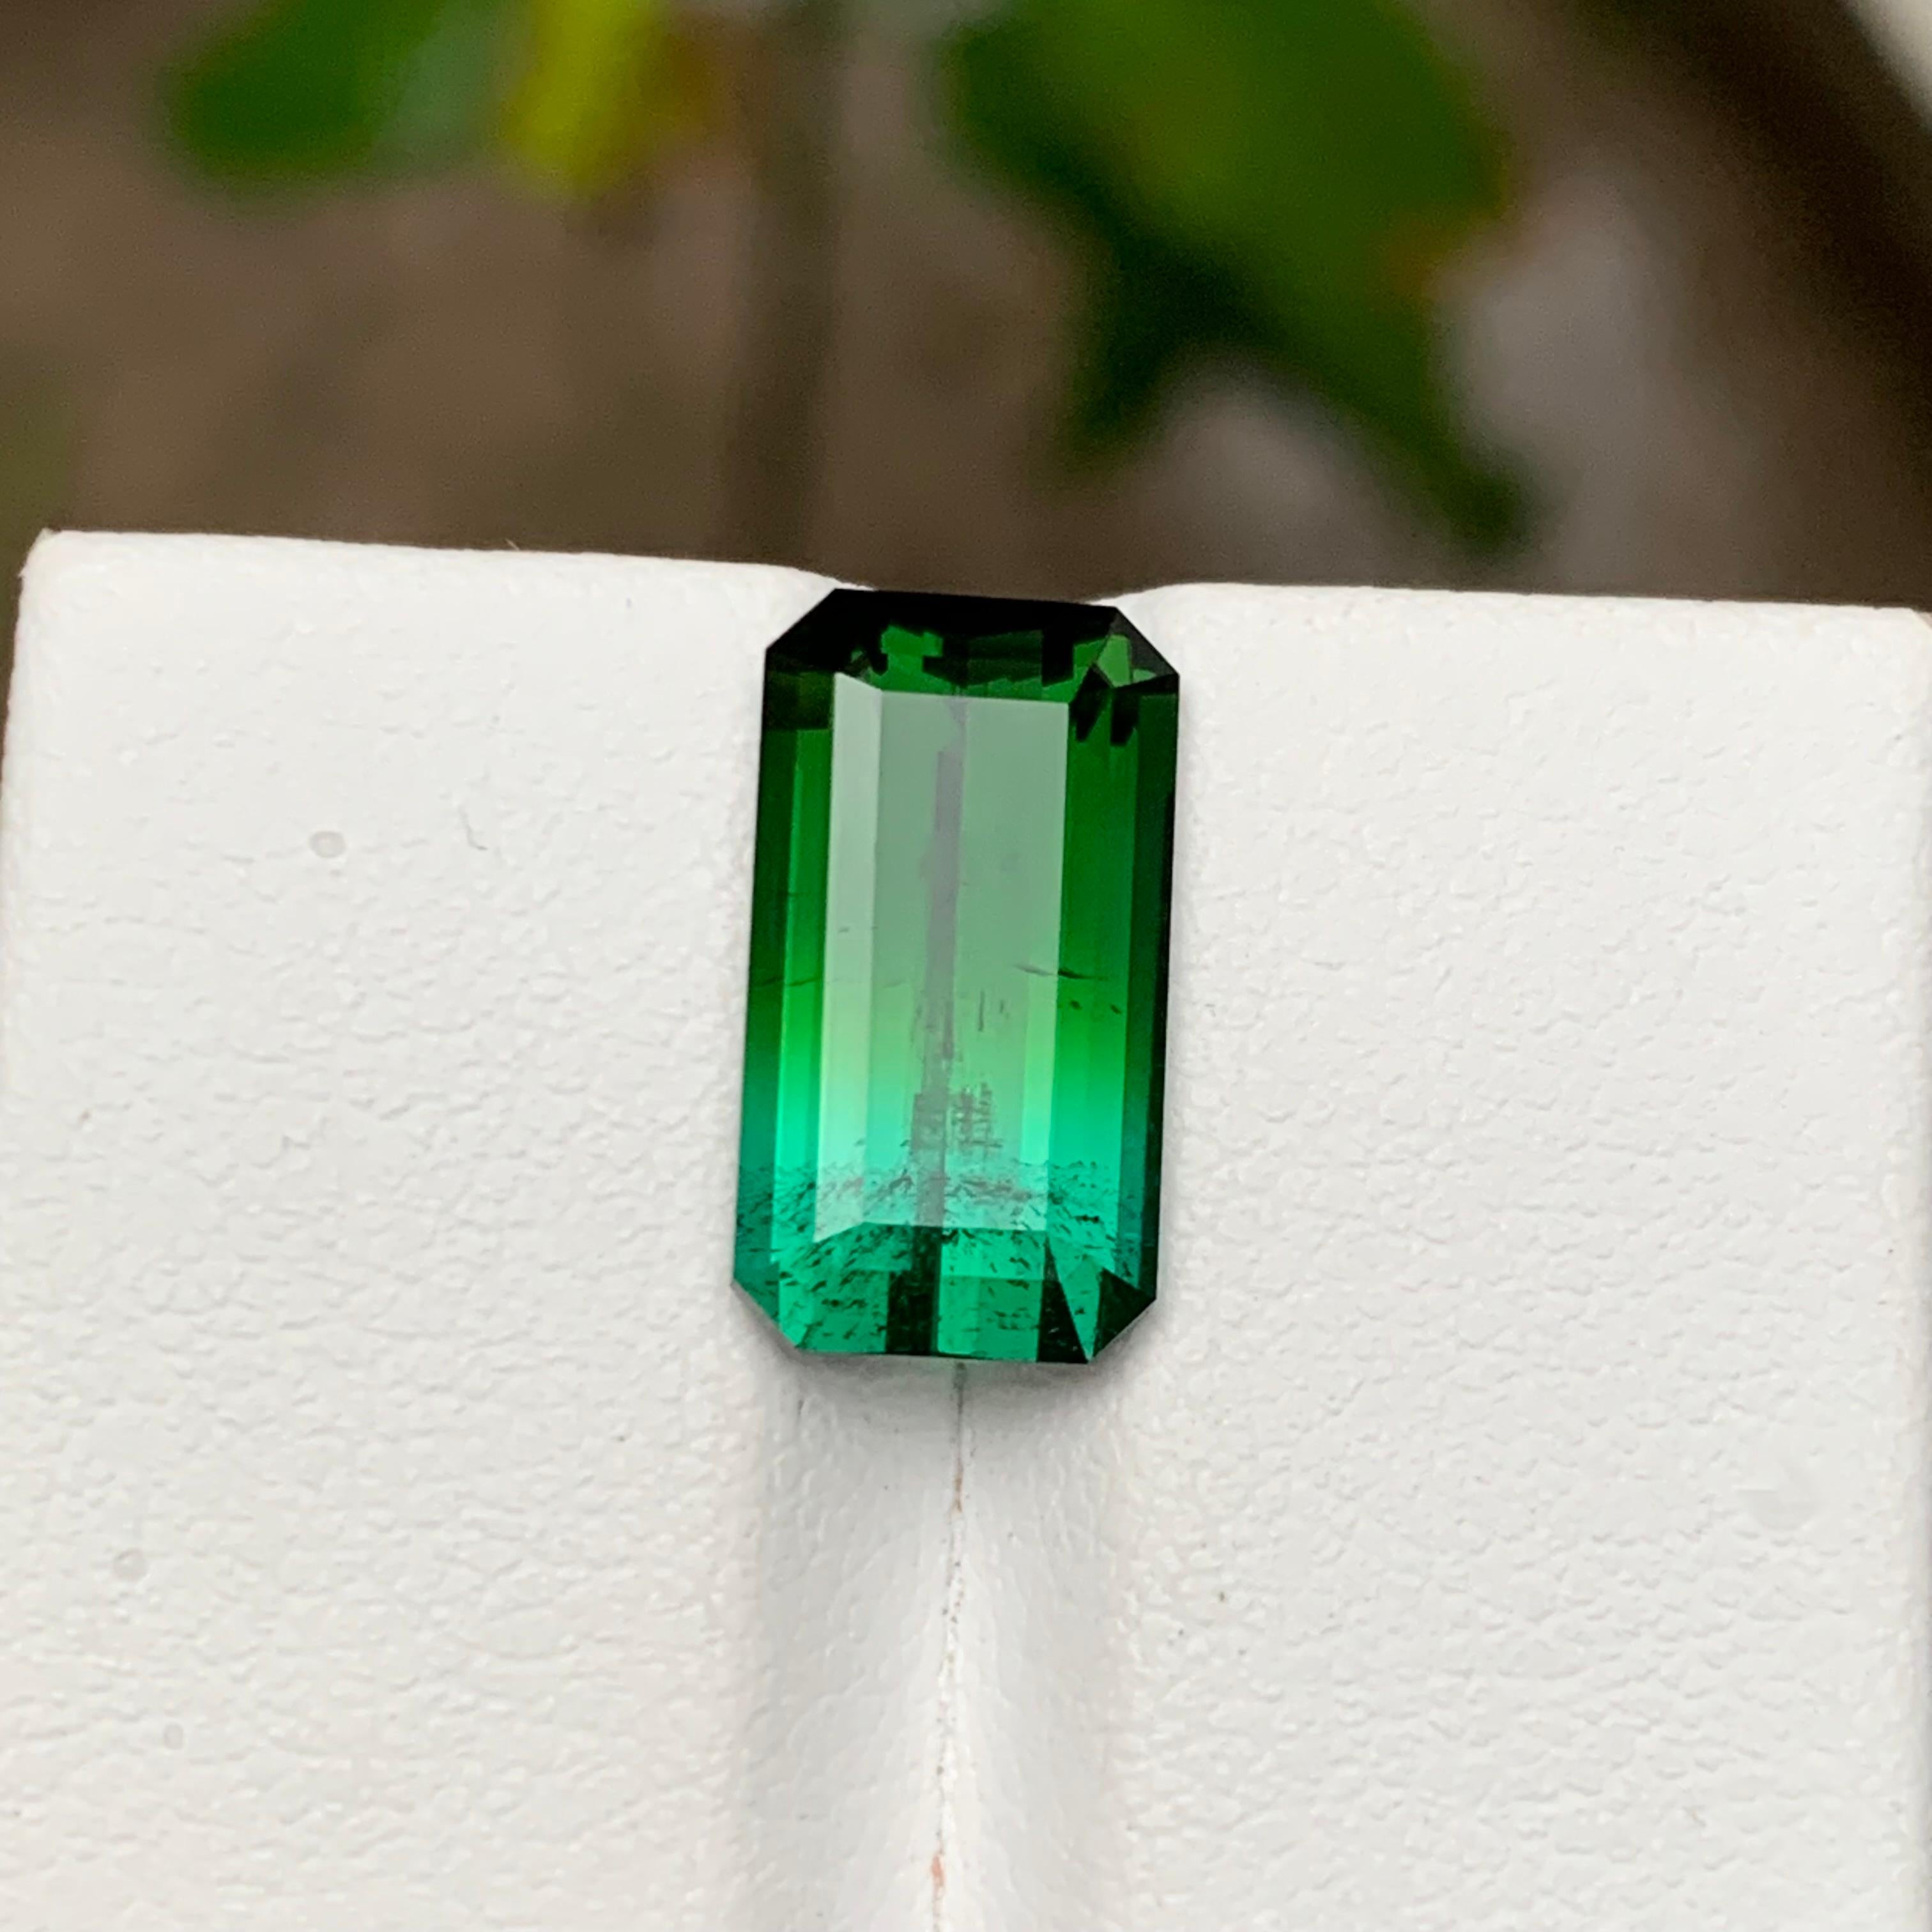 GEMSTONE TYPE: Tourmaline
PIECE(S): 1
WEIGHT: 5.05 Carats
SHAPE: Emerald Cut
SIZE (MM): 14.05 x 7.68 x 5.19
COLOR: Bicolor
CLARITY: SI
TREATMENT: None
ORIGIN: Afghanistan
CERTIFICATE: On demand

Truly exquisite 5.05 Carat Green and Neon Blue Bicolor